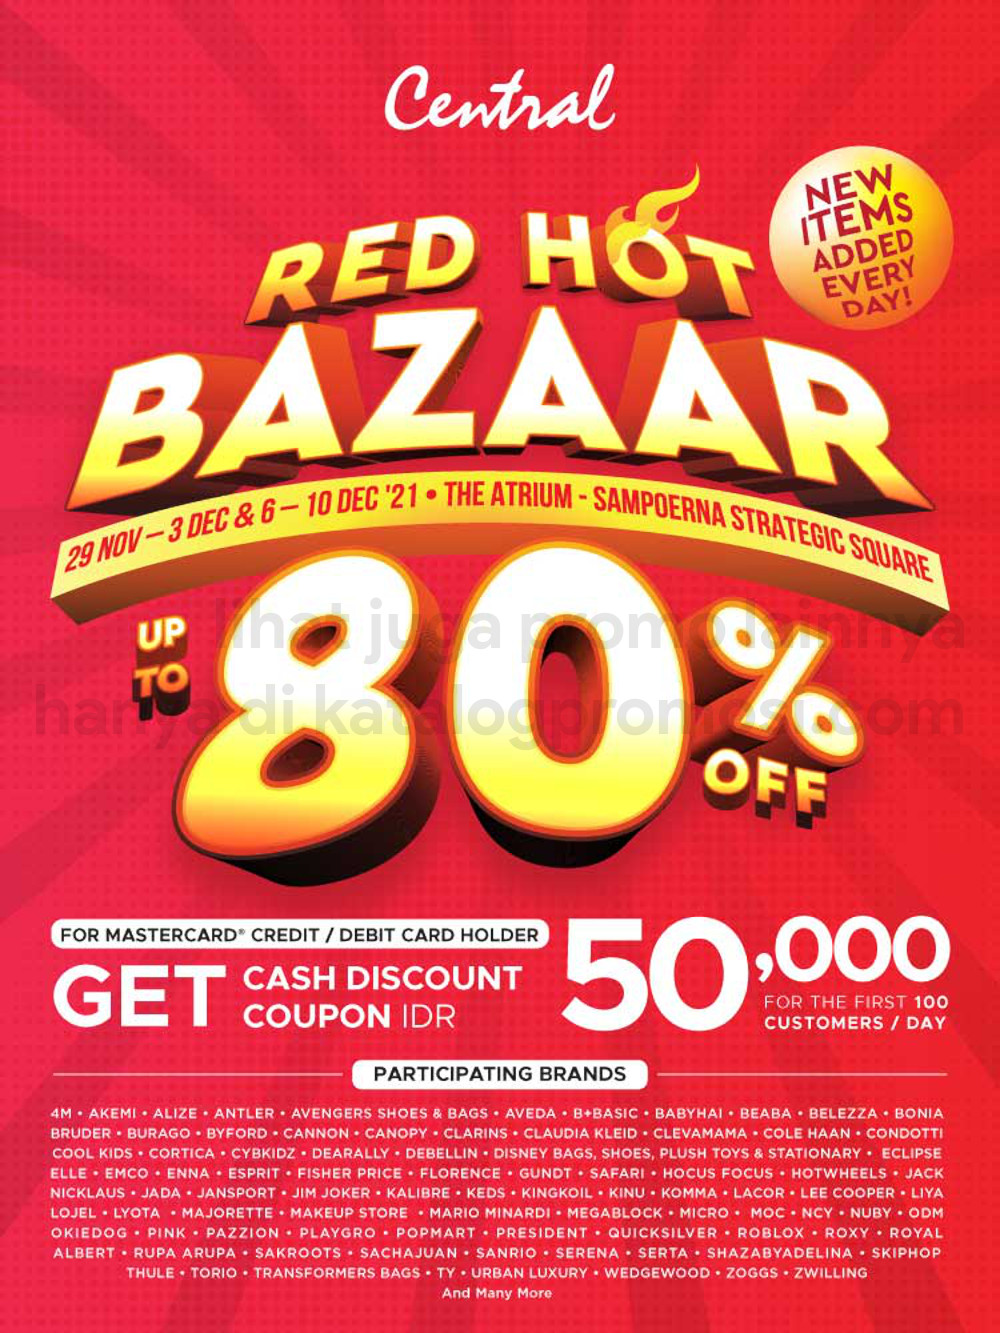 CENTRAL DEPARTMENT STORE RED HOT BAZAAR - DISCOUNT up to 80% off